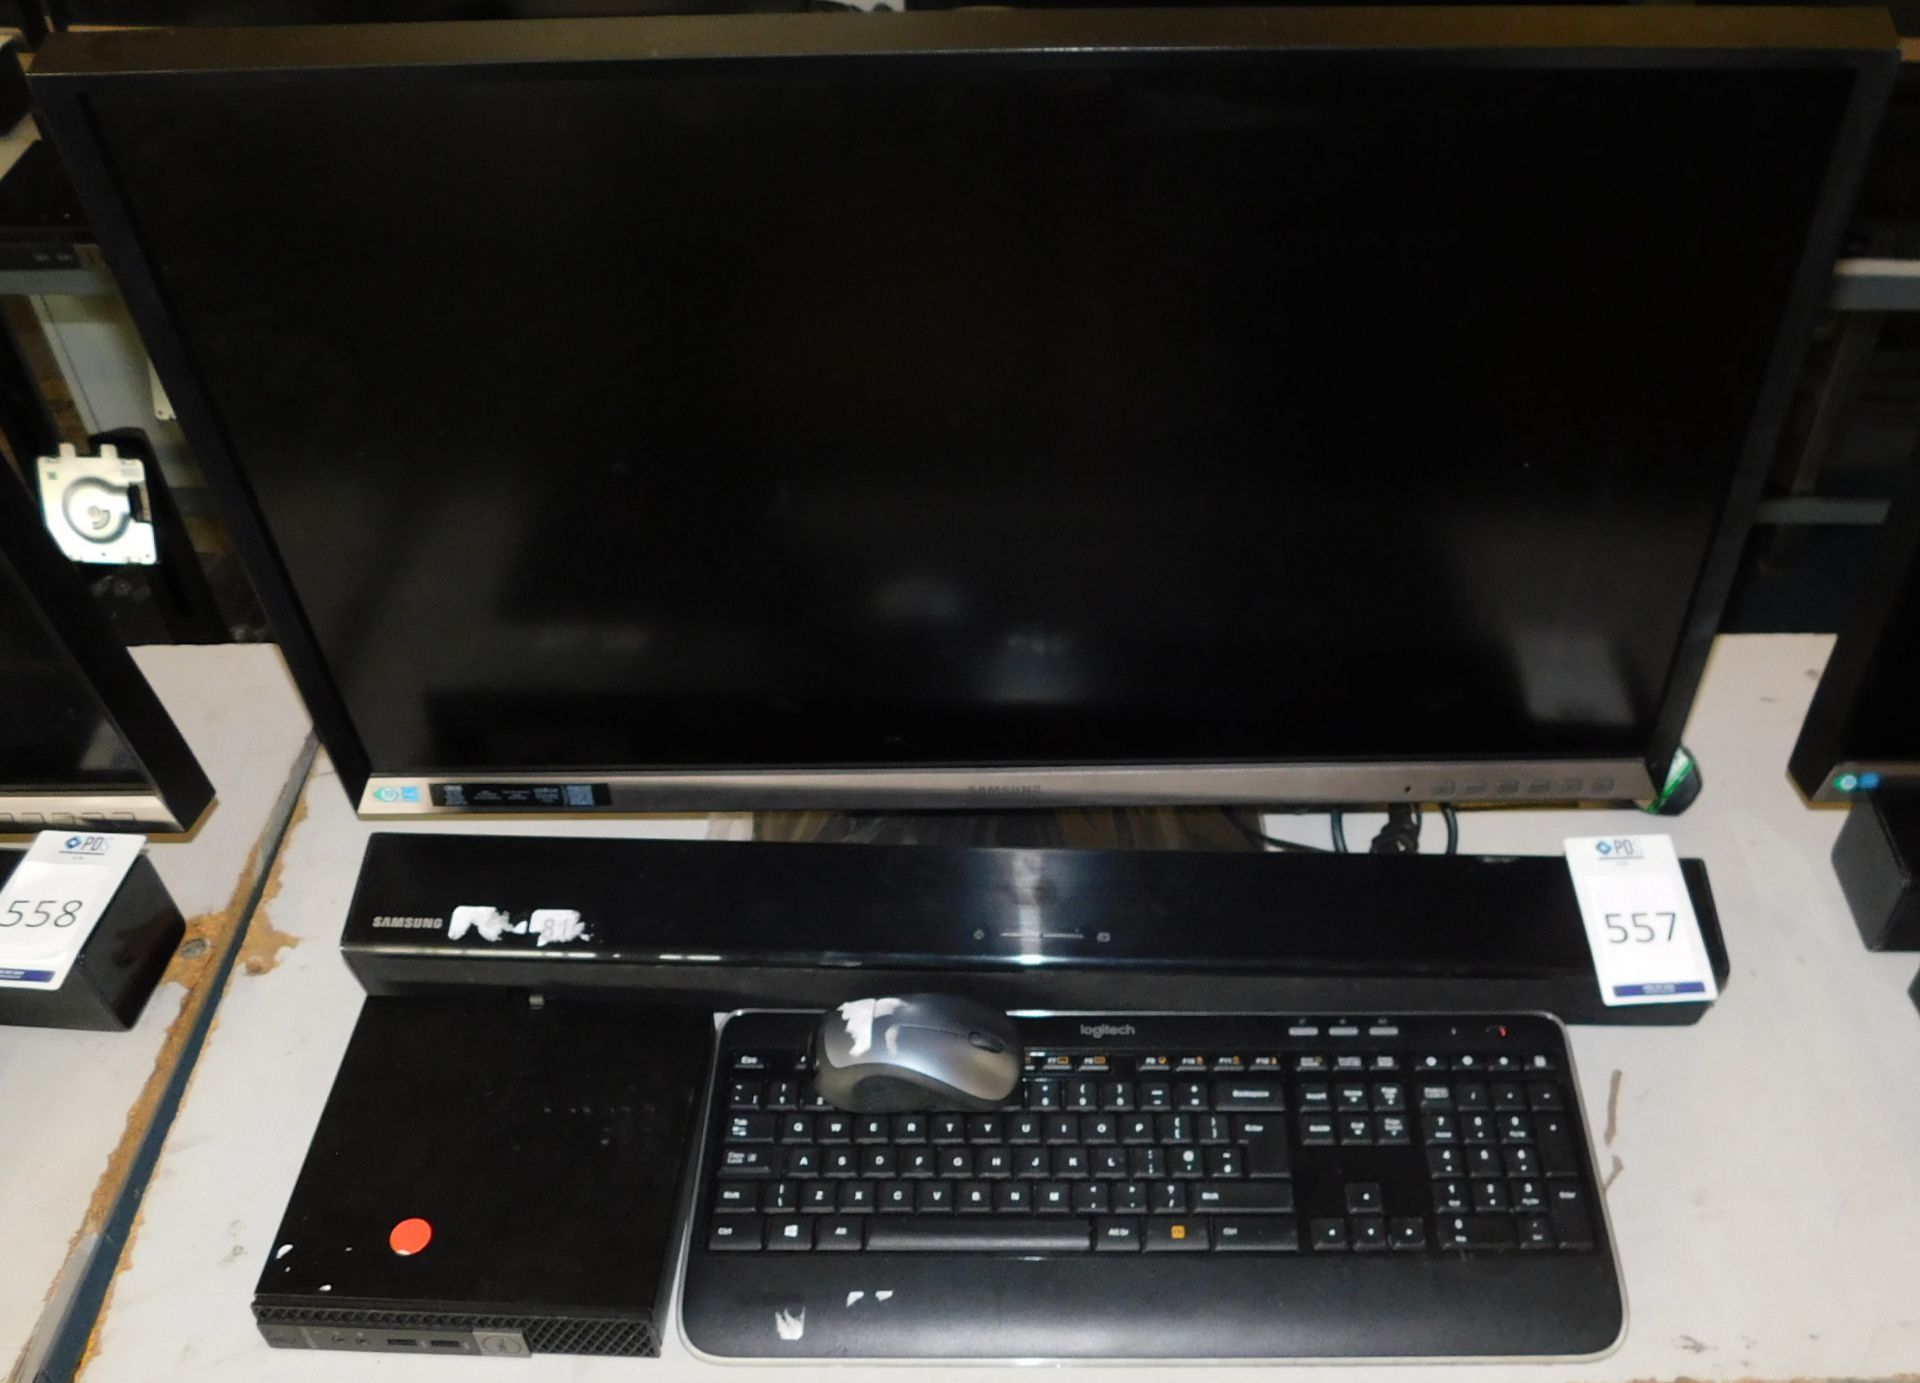 Media Suite Comprising: Samsung S32D850T 32in Colour Display Unit with stand; Samsung HW-J250